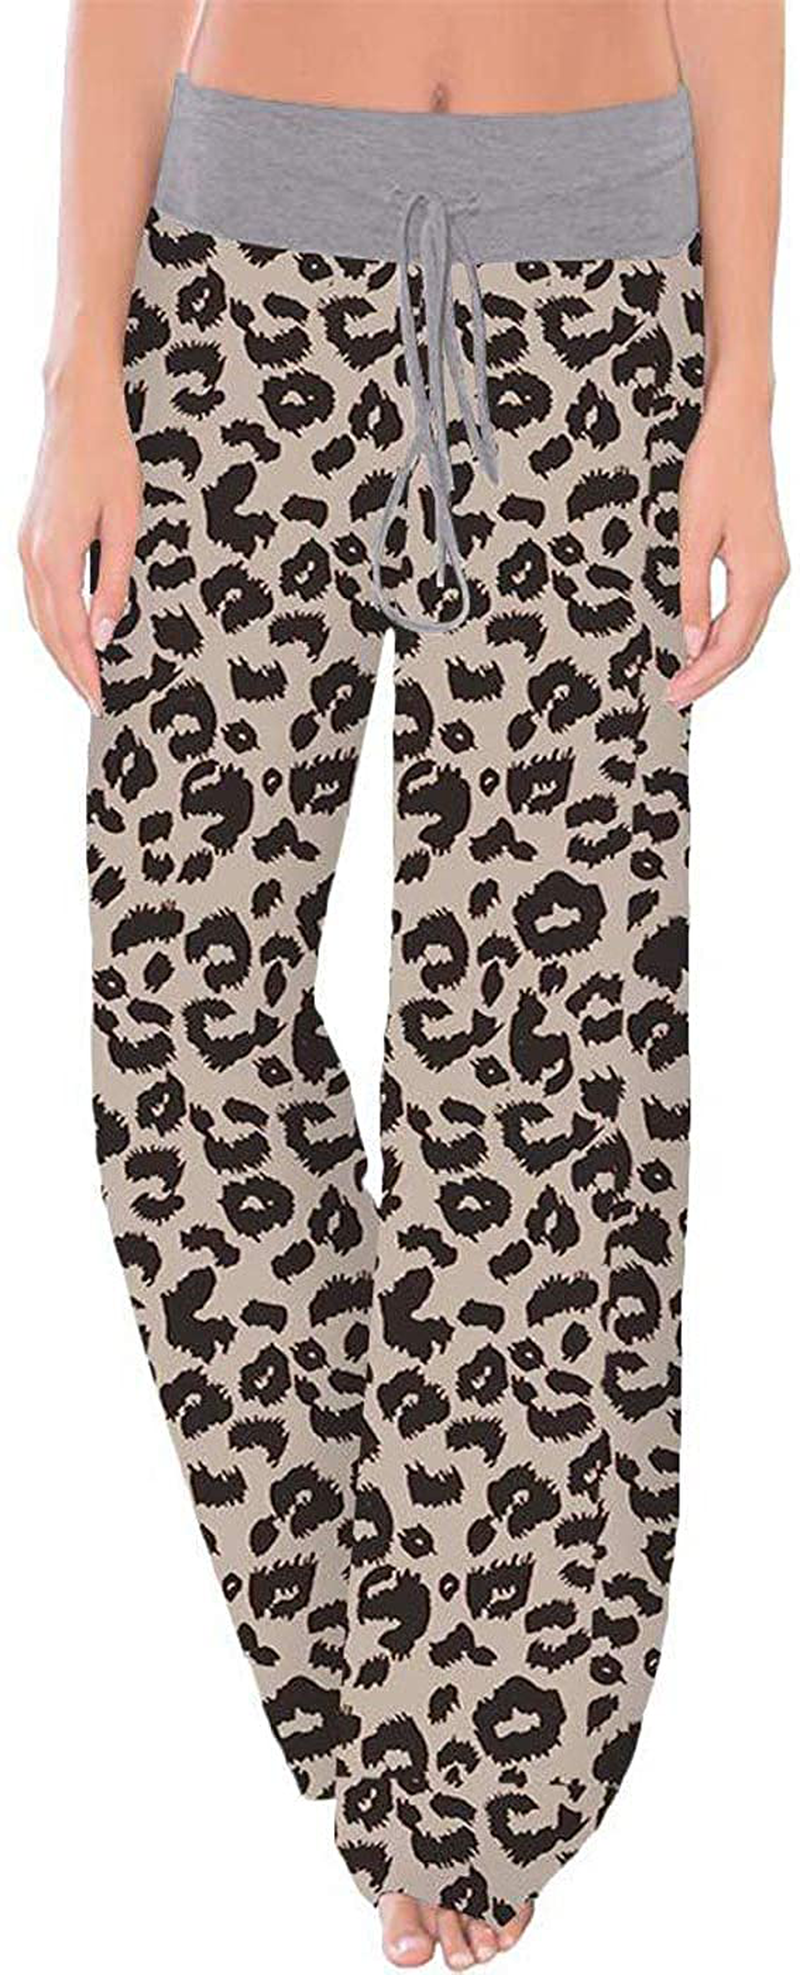 Askwind Women's Floral Print Comfy Stretch Drawstring Palazzo Wide Leg Lounge Pants